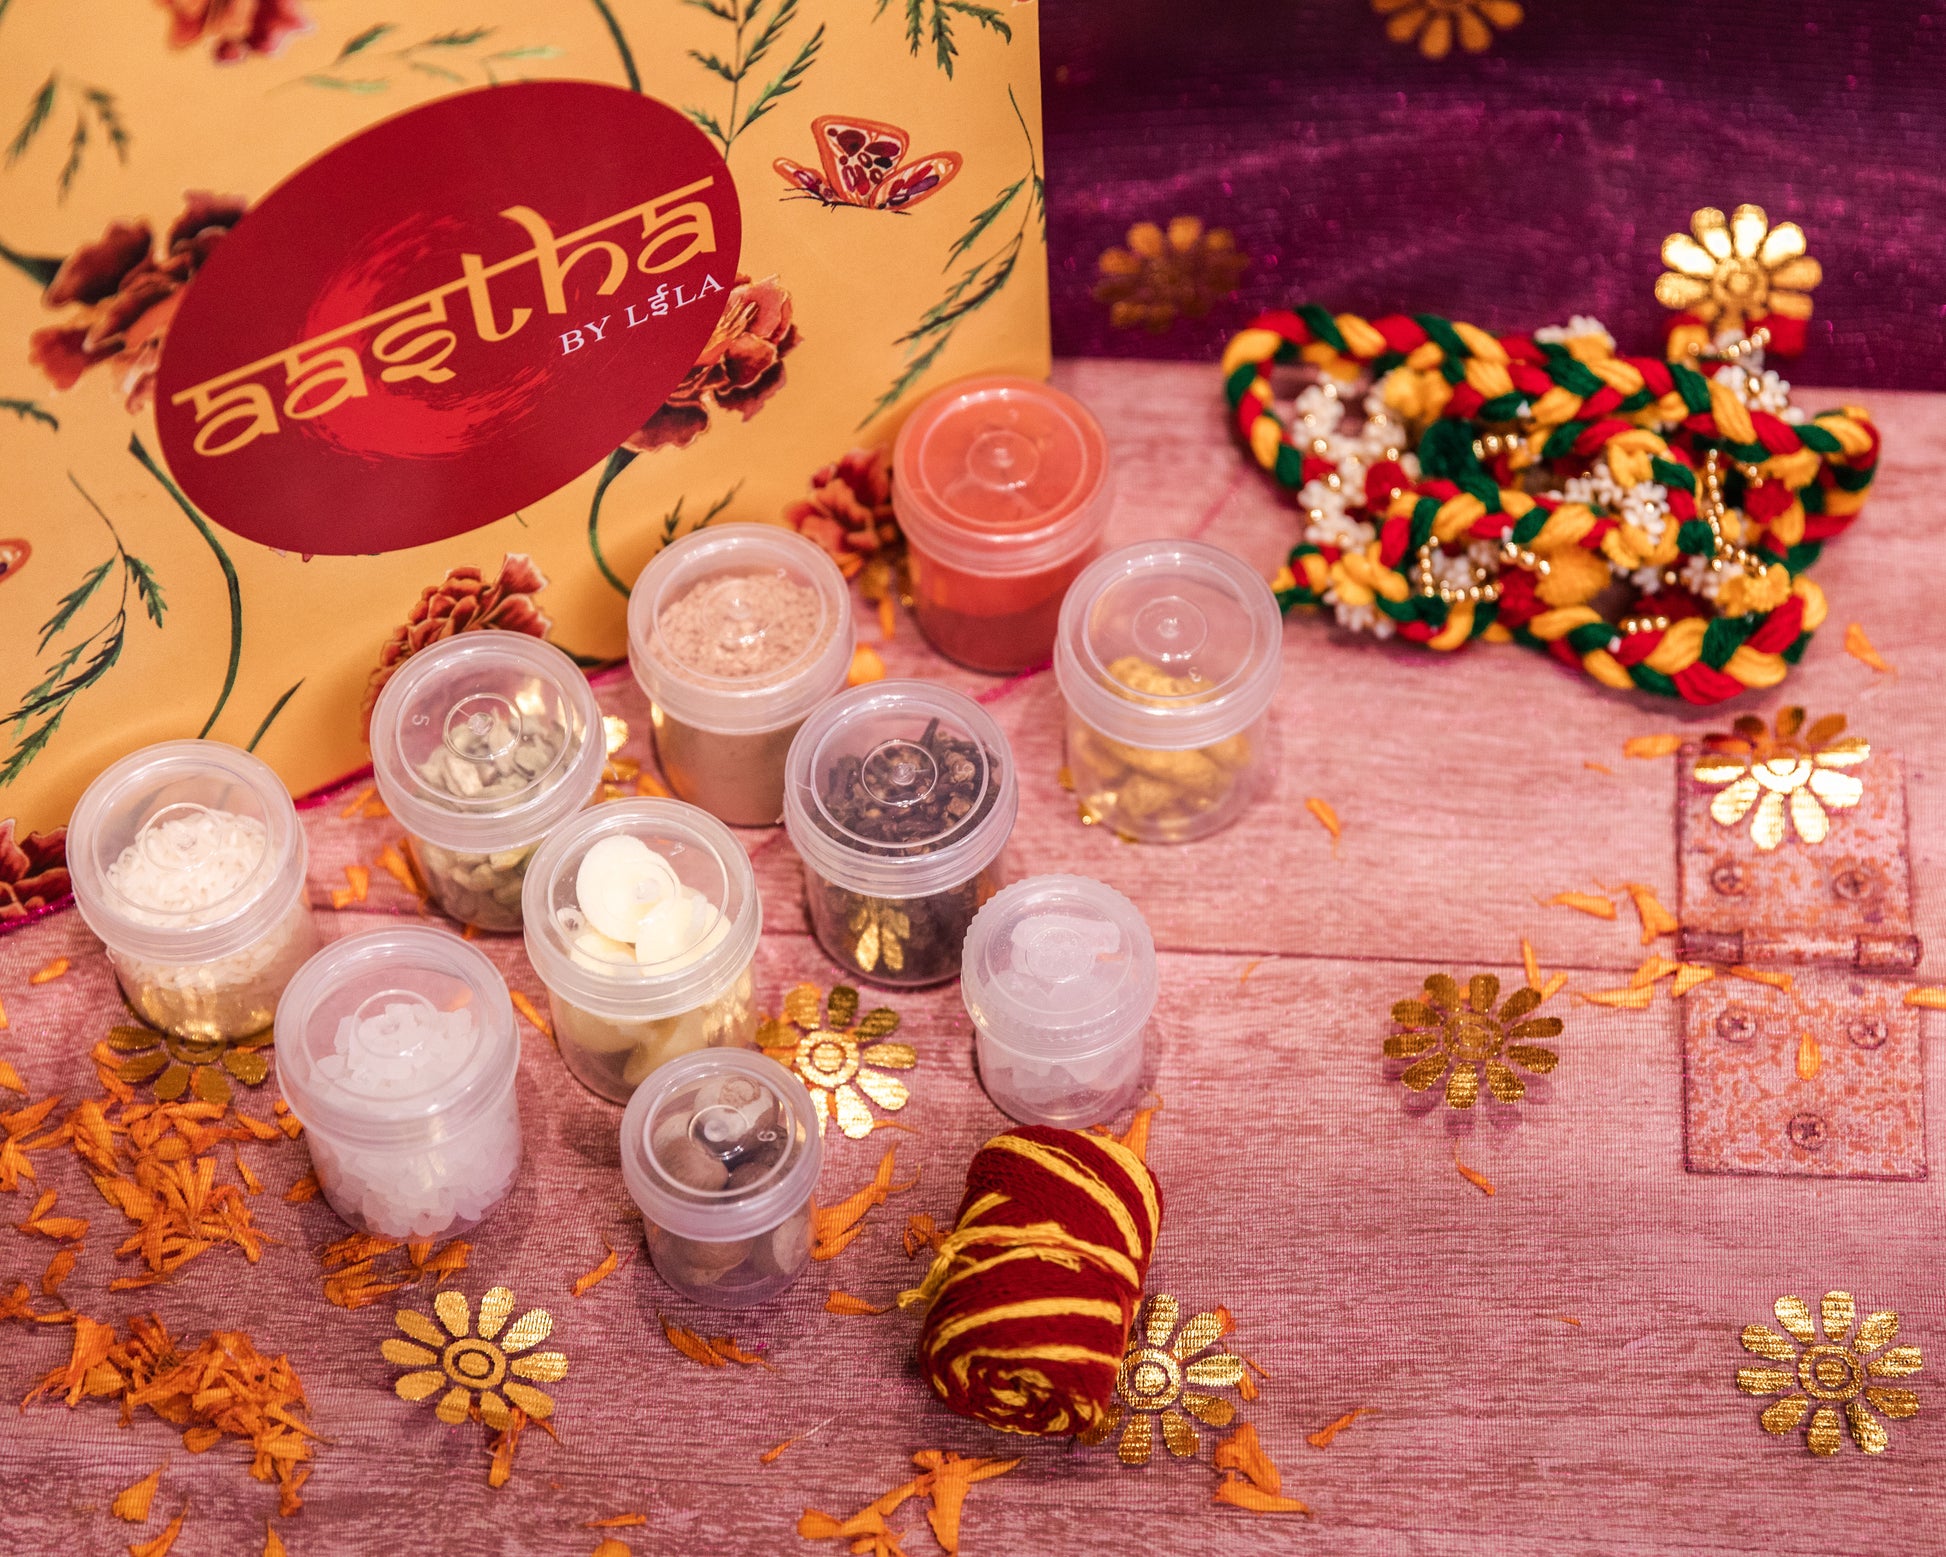 LeelaTheStore's Navratri Pooja Box is a complete set that includes all the essential samagri required for a proper Navratri pooja.